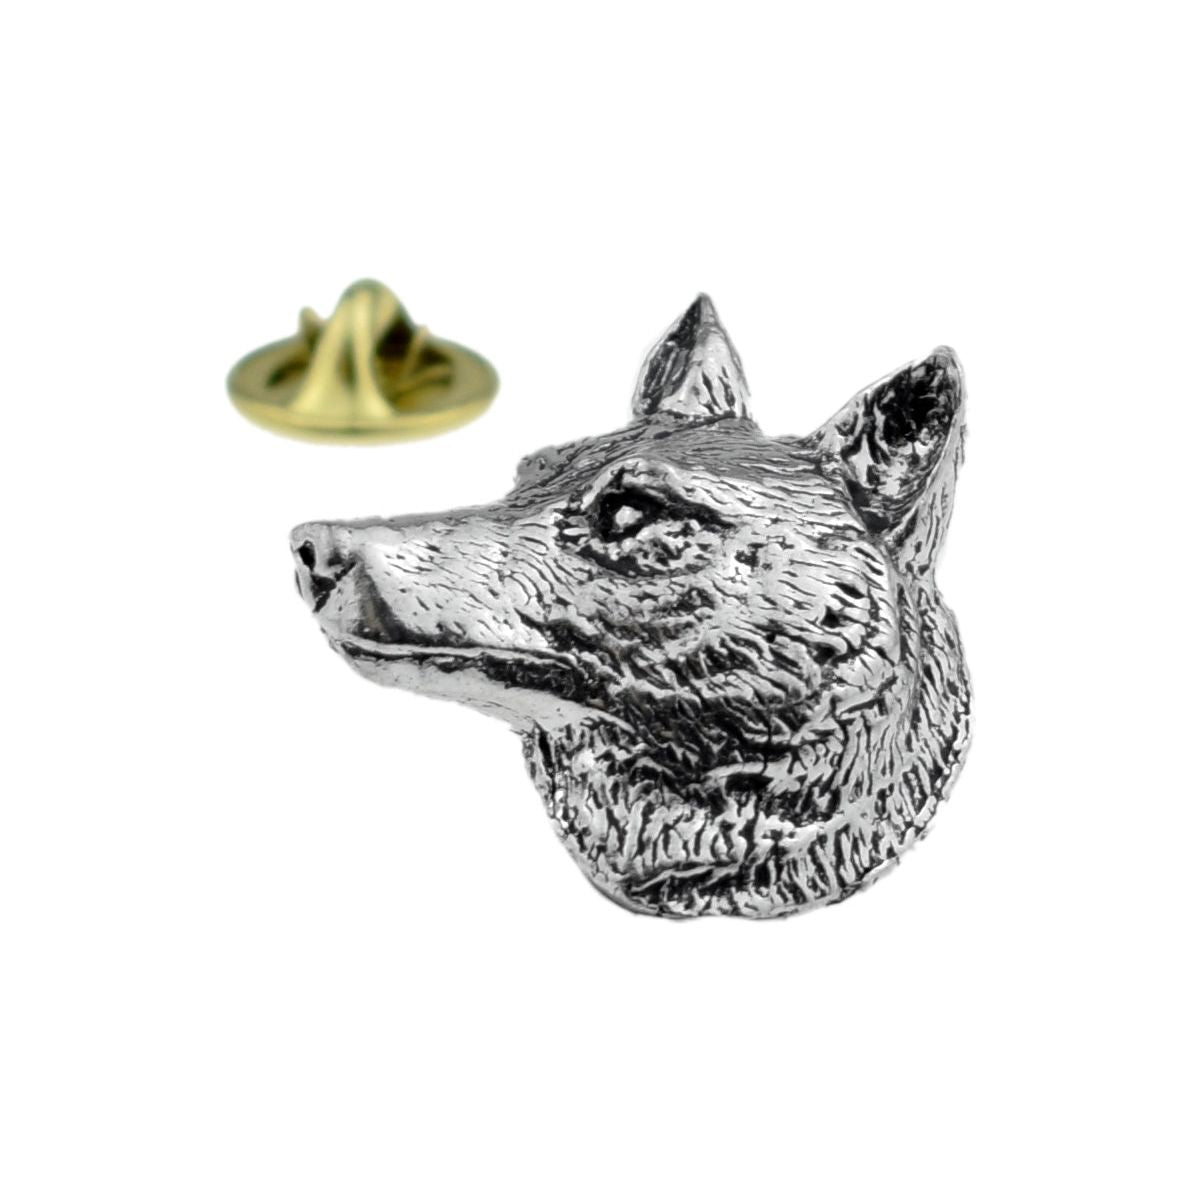 Wolfs Head English Pewter Lapel Pin Badge - Ashton and Finch